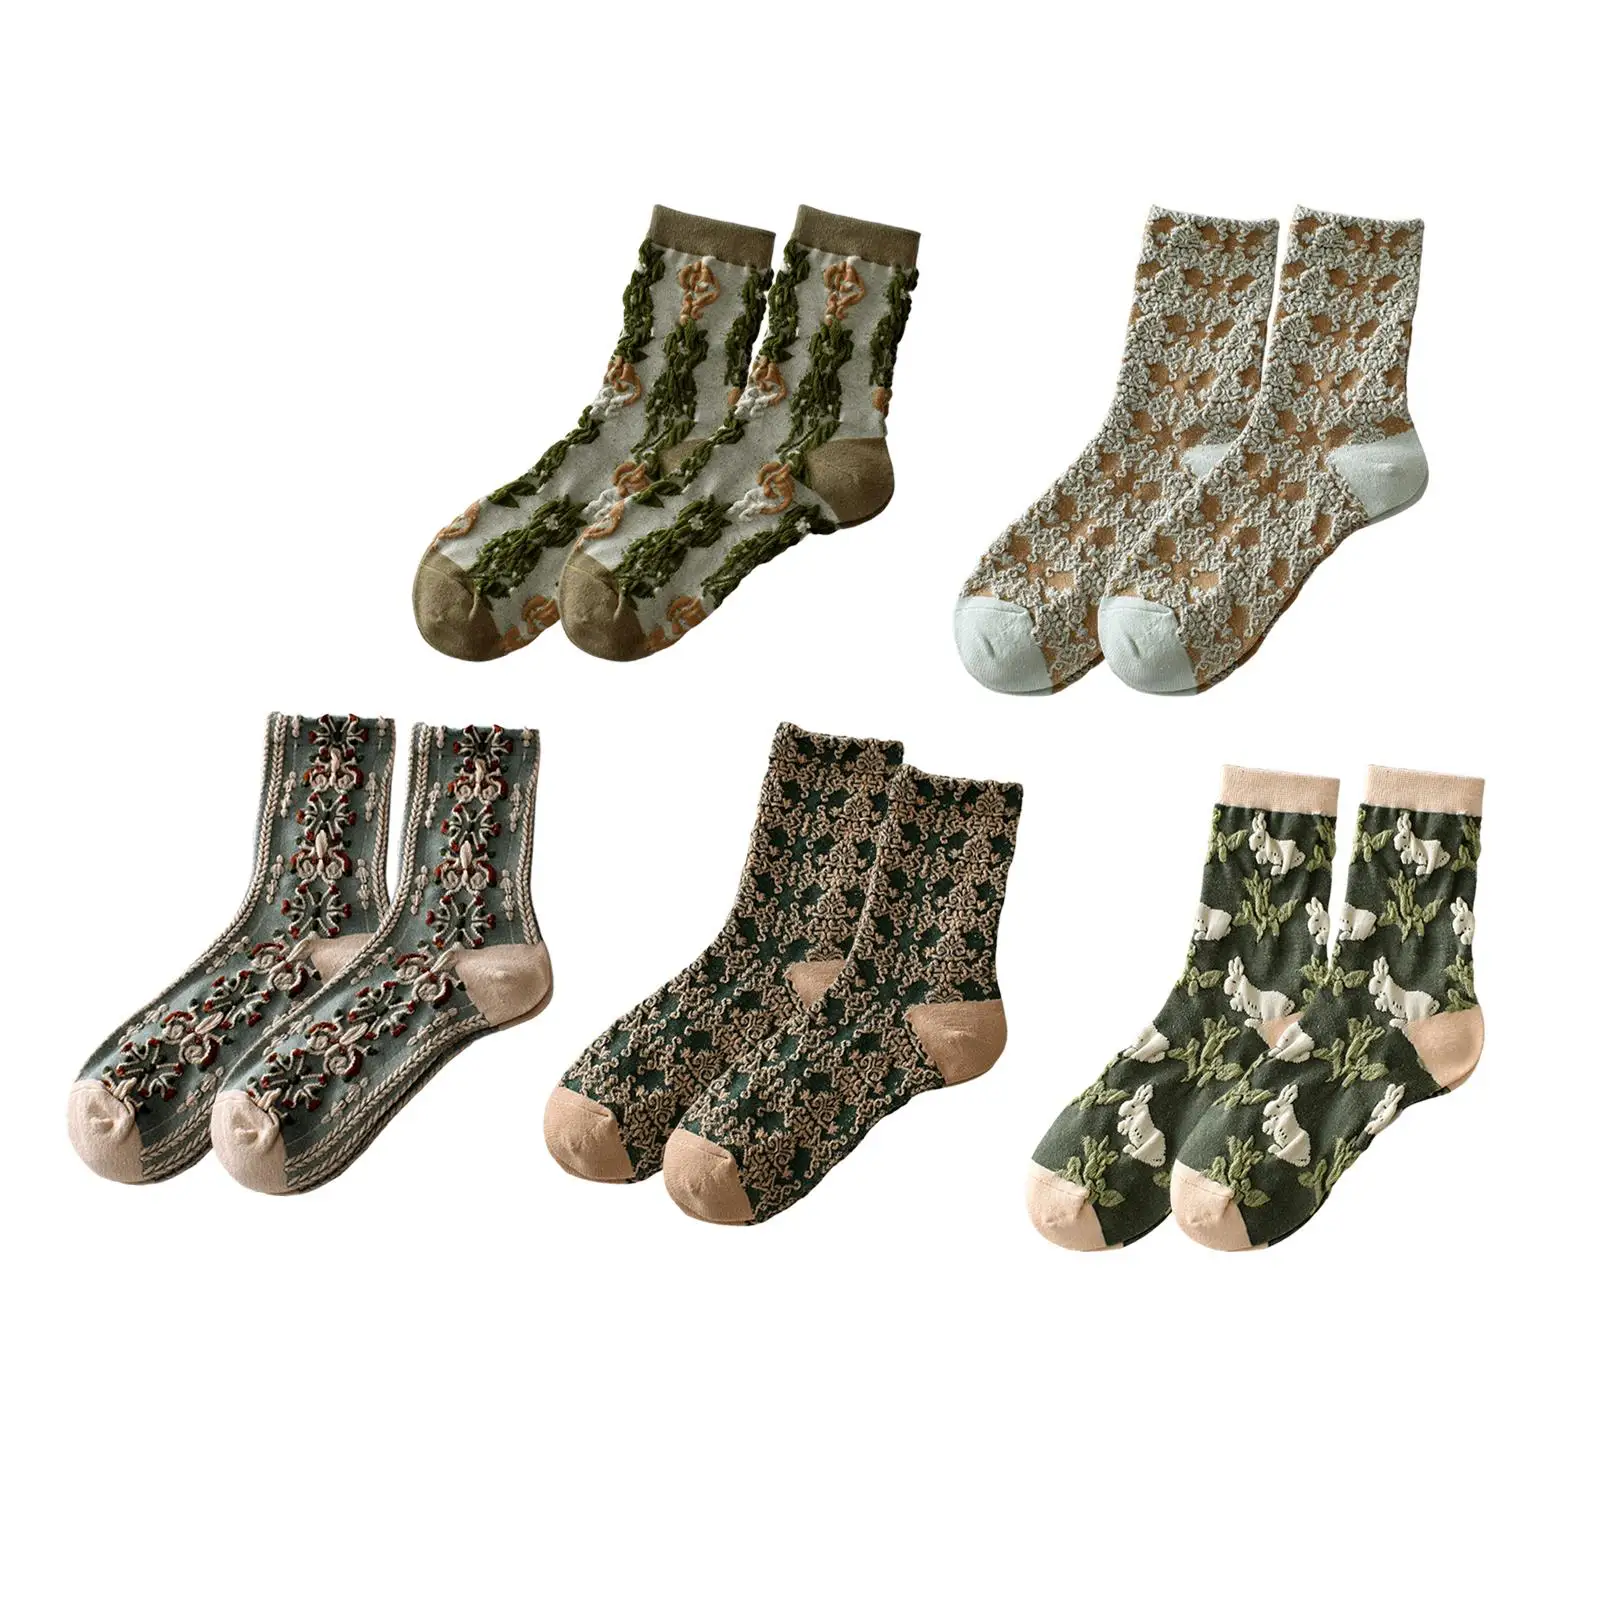 10Pair Jacquard Crew Socks Embroidery Decorative Birthday Gift Thicker Casual Women Socks for Volleyball New Year Football Home